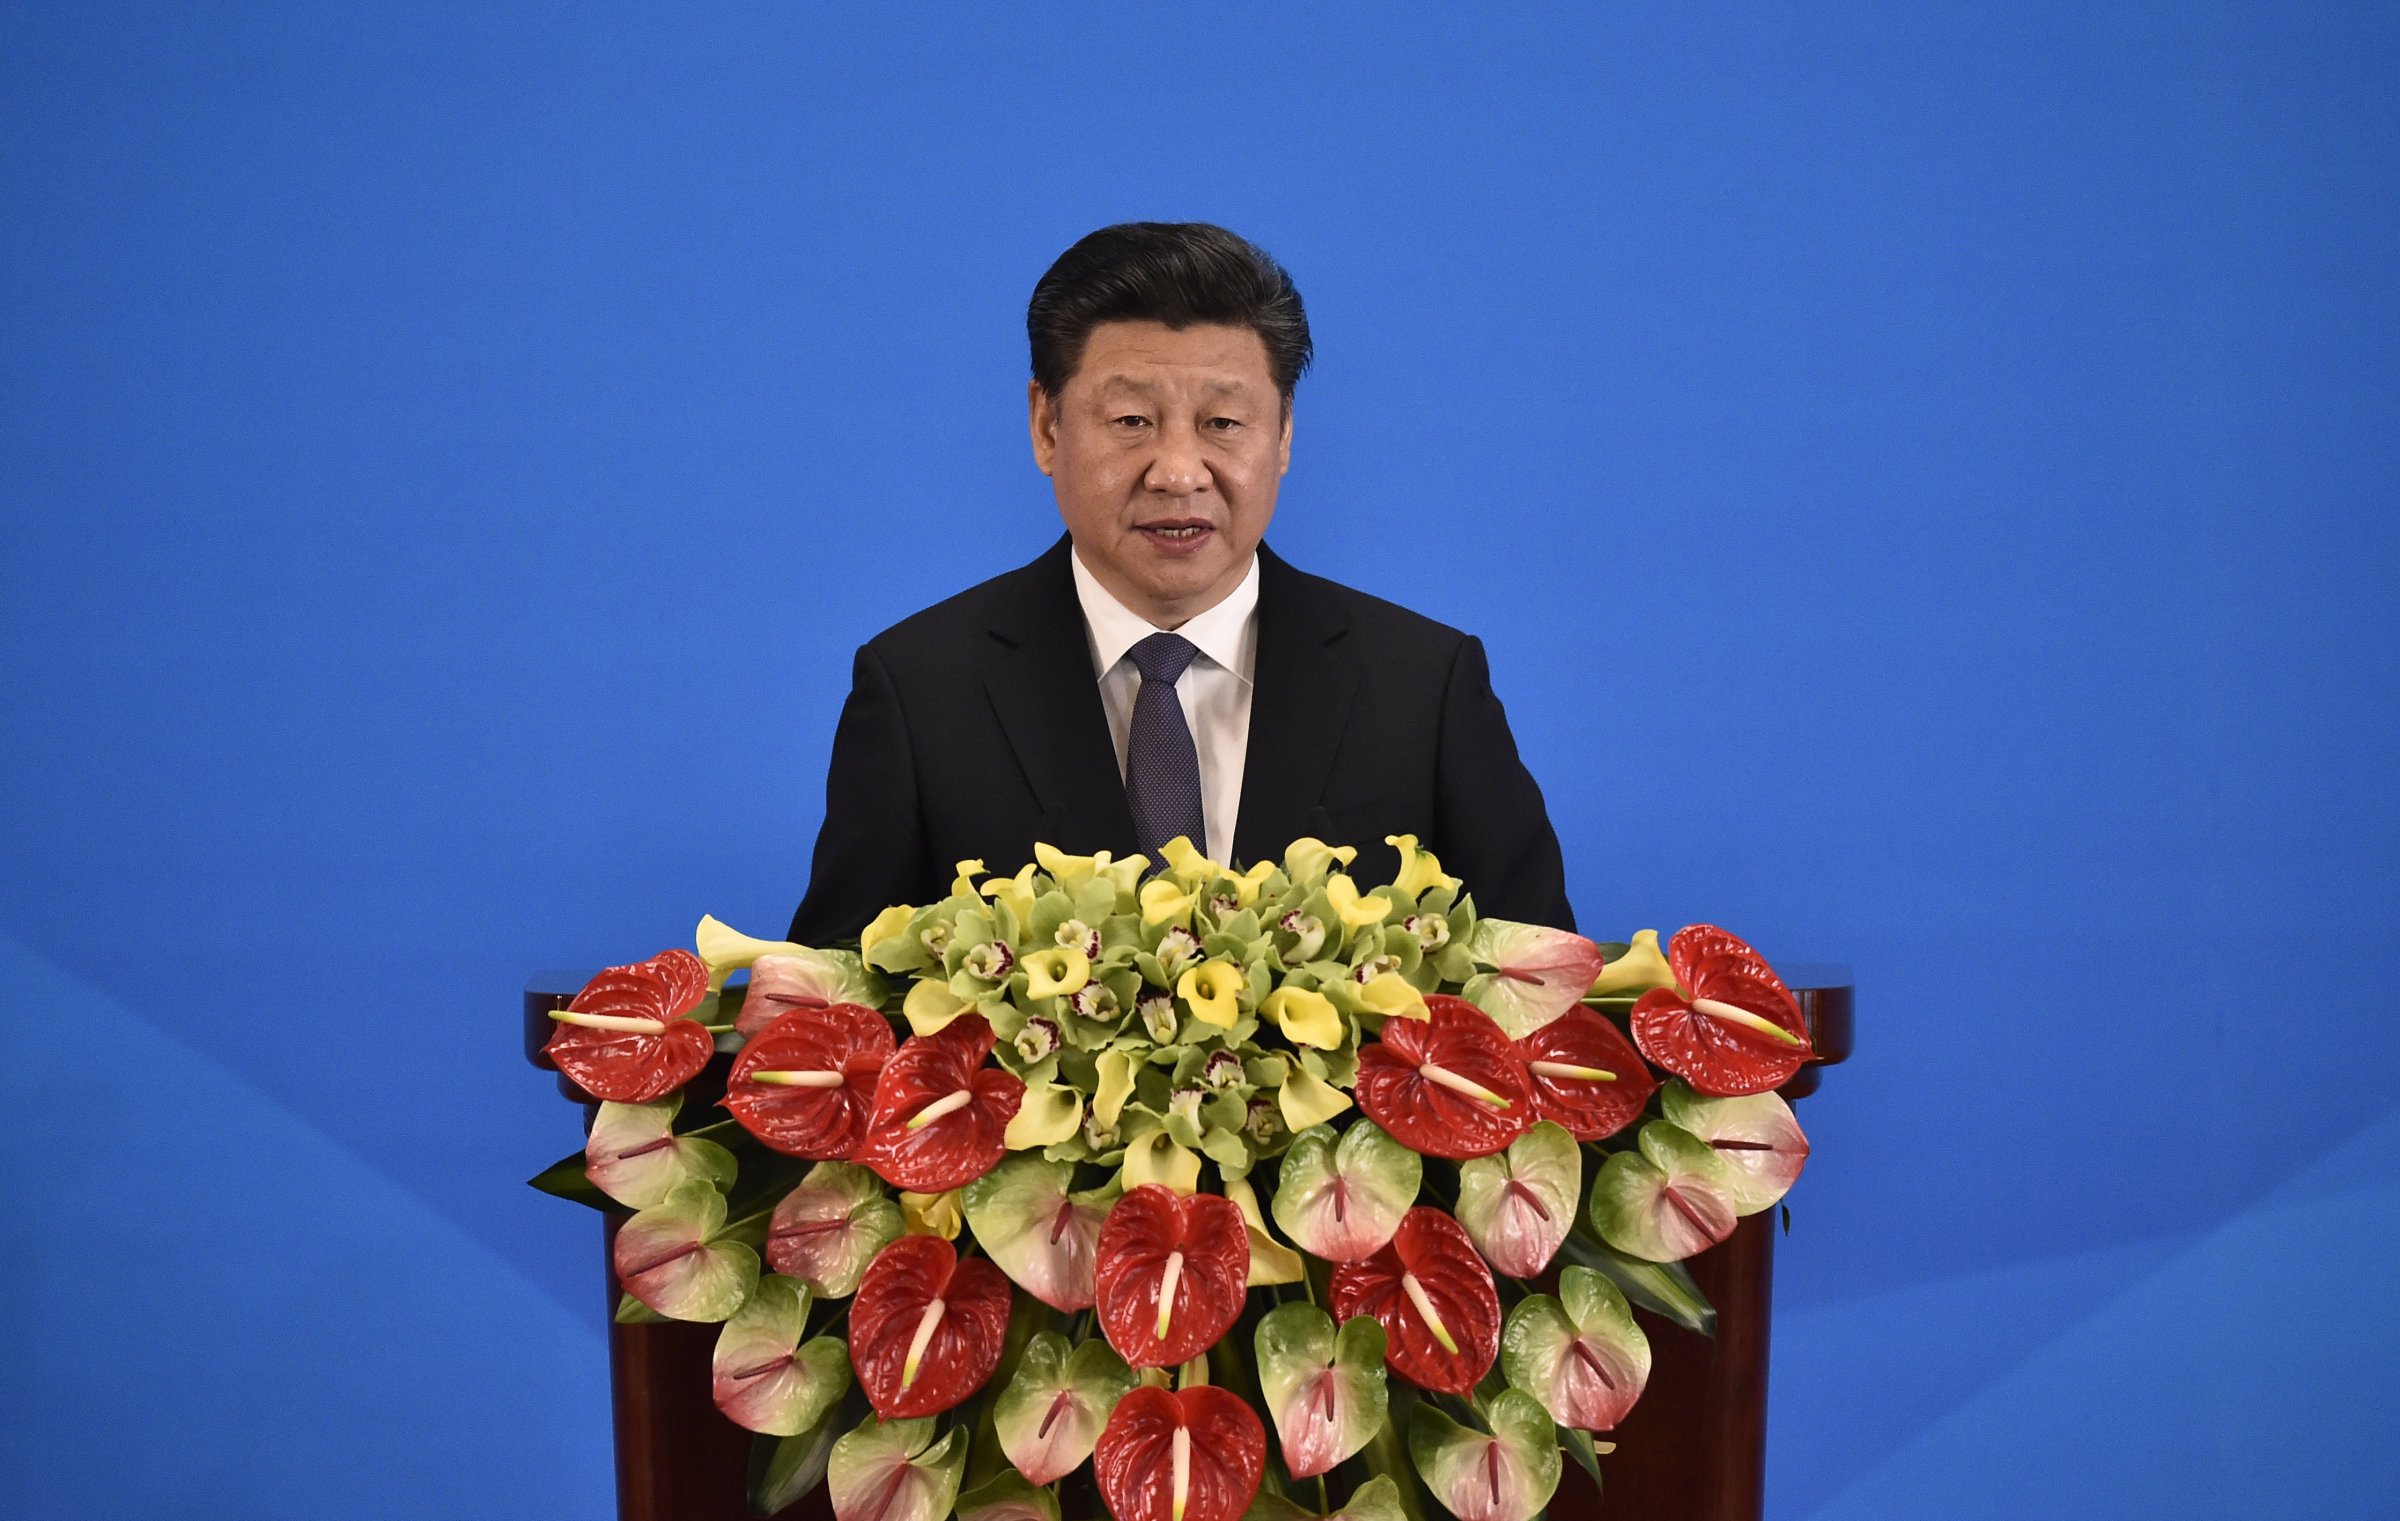 China's President Xi Jinping delivers a speech at the opening ceremony of the fifth regular foreign ministers' meeting of the Conference on Interaction and Confidence Building Measures in Asia (CICA) at the Diaoyutai State Guesthouse on April 28, 2016 in Beijing, China.